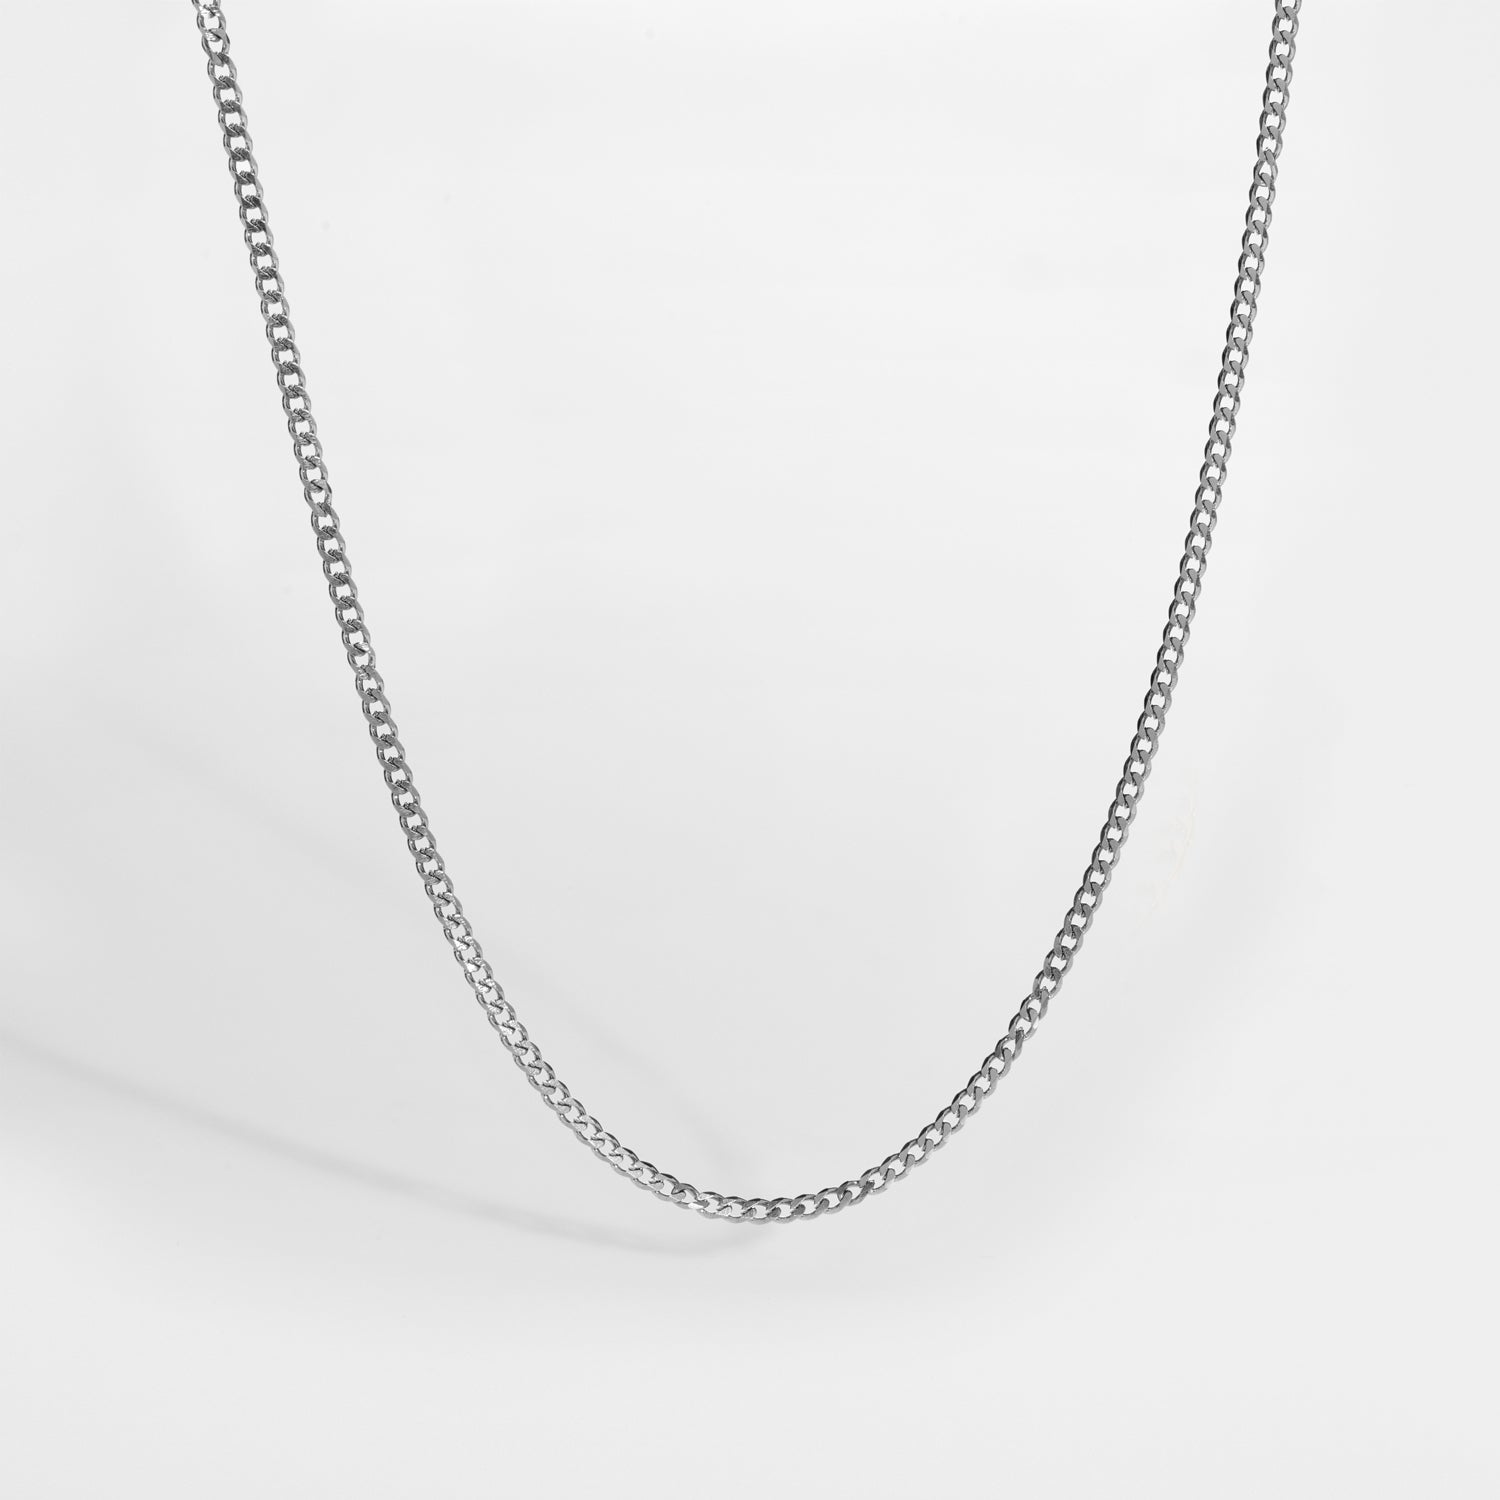 NL Minimal Sequence necklace - Silver-toned